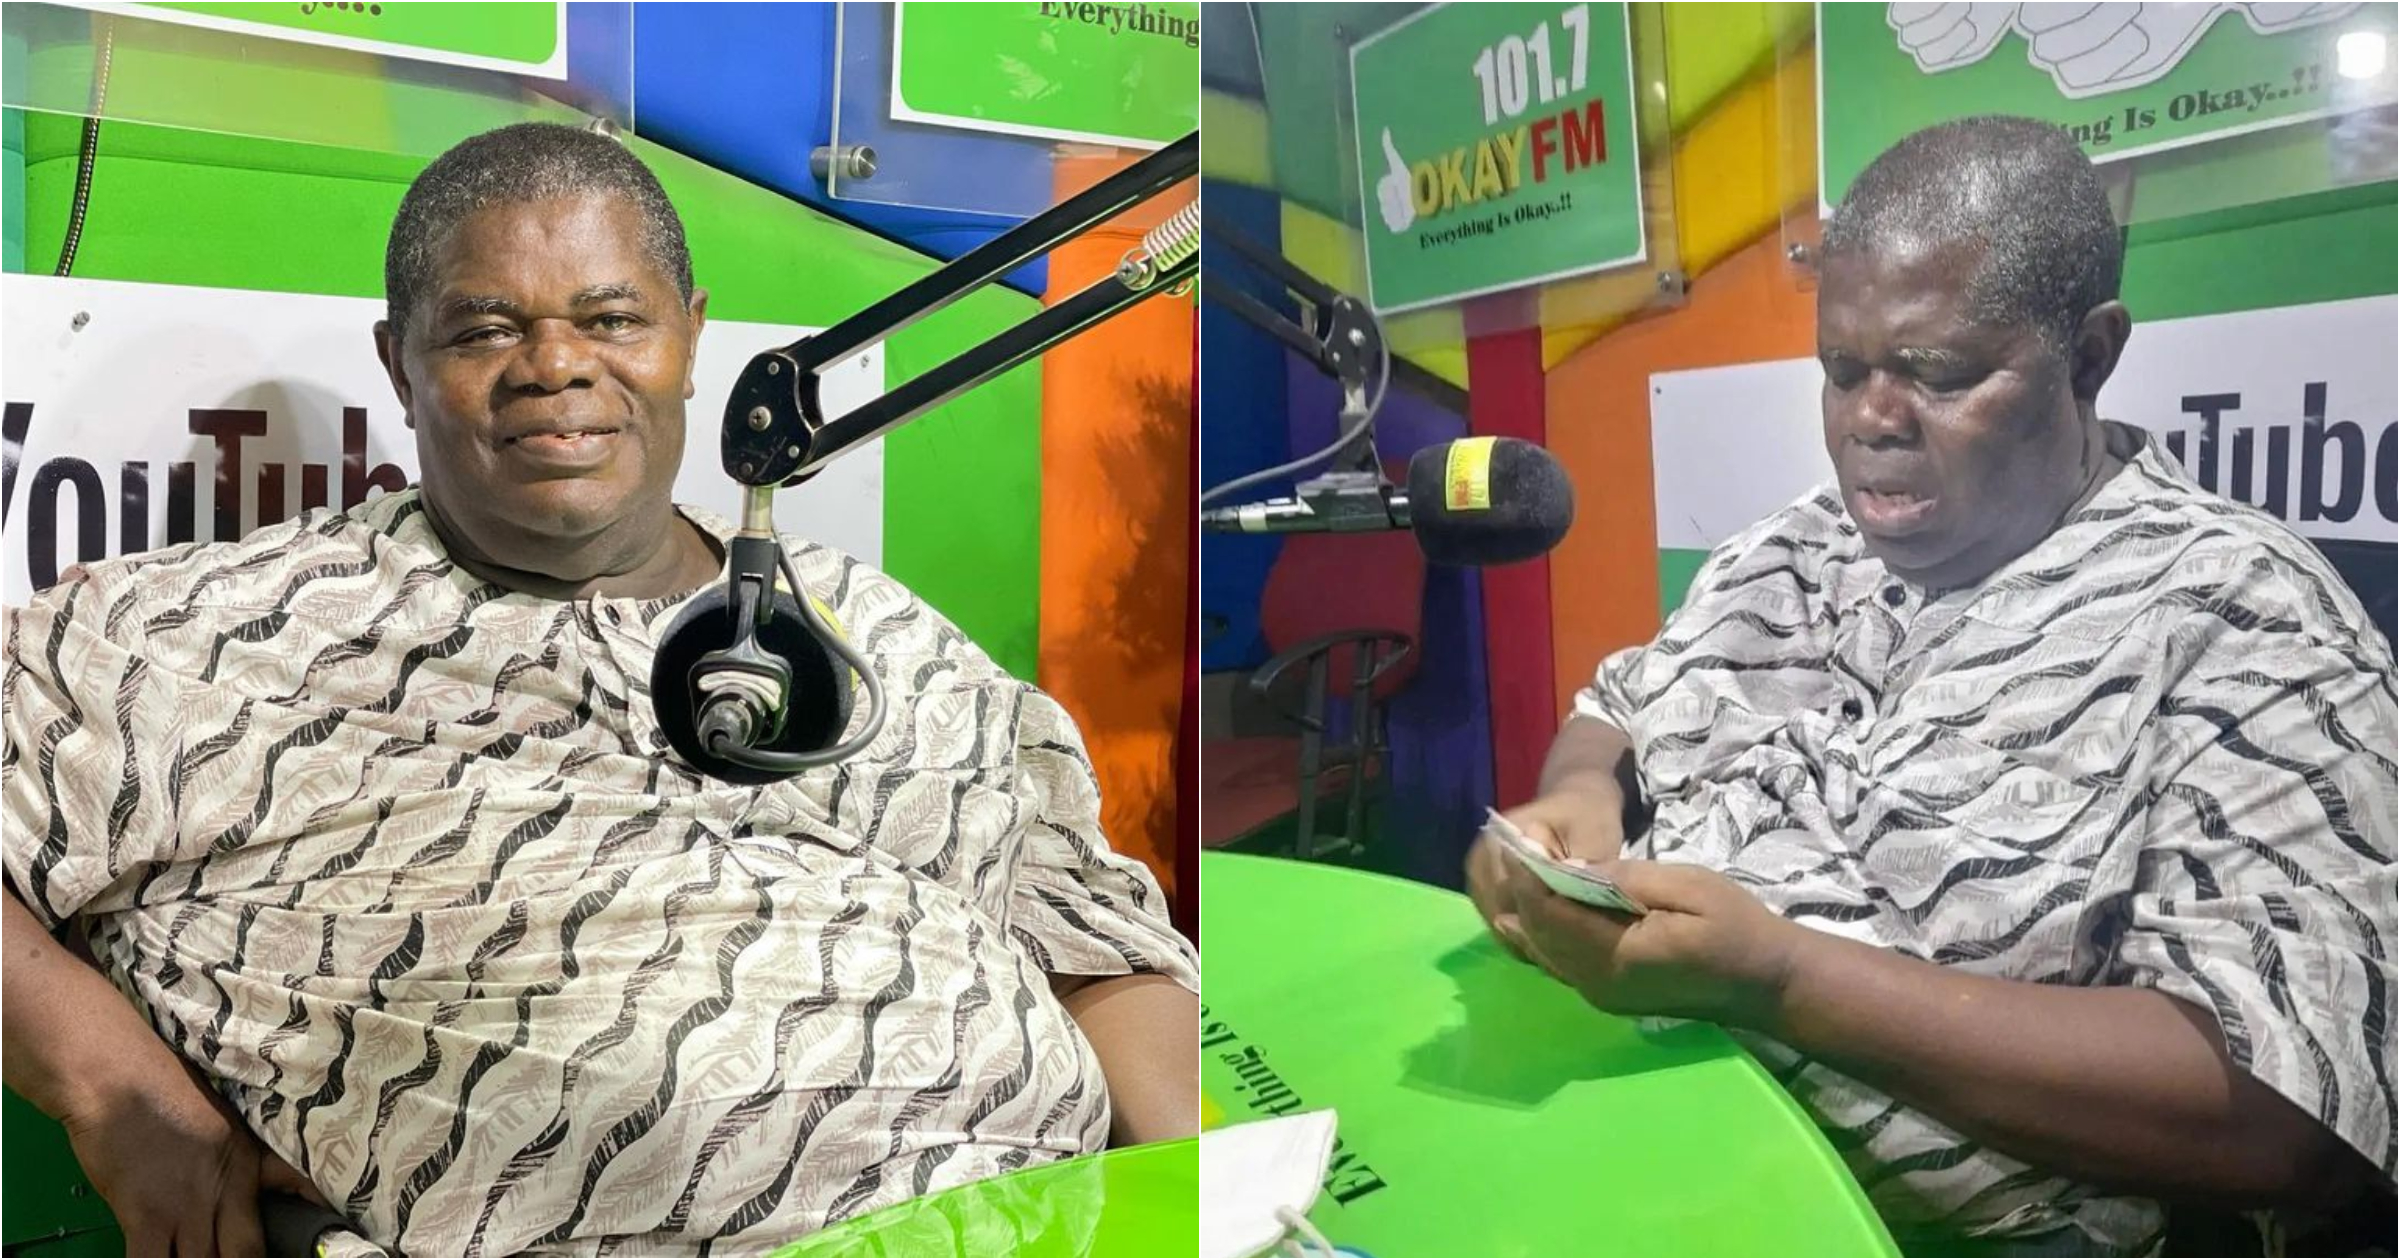 Veteran actor Psalm Adjeteyfio got GHC40k from Chief of Staff in addition to Bawumia's GHC50k, details drop